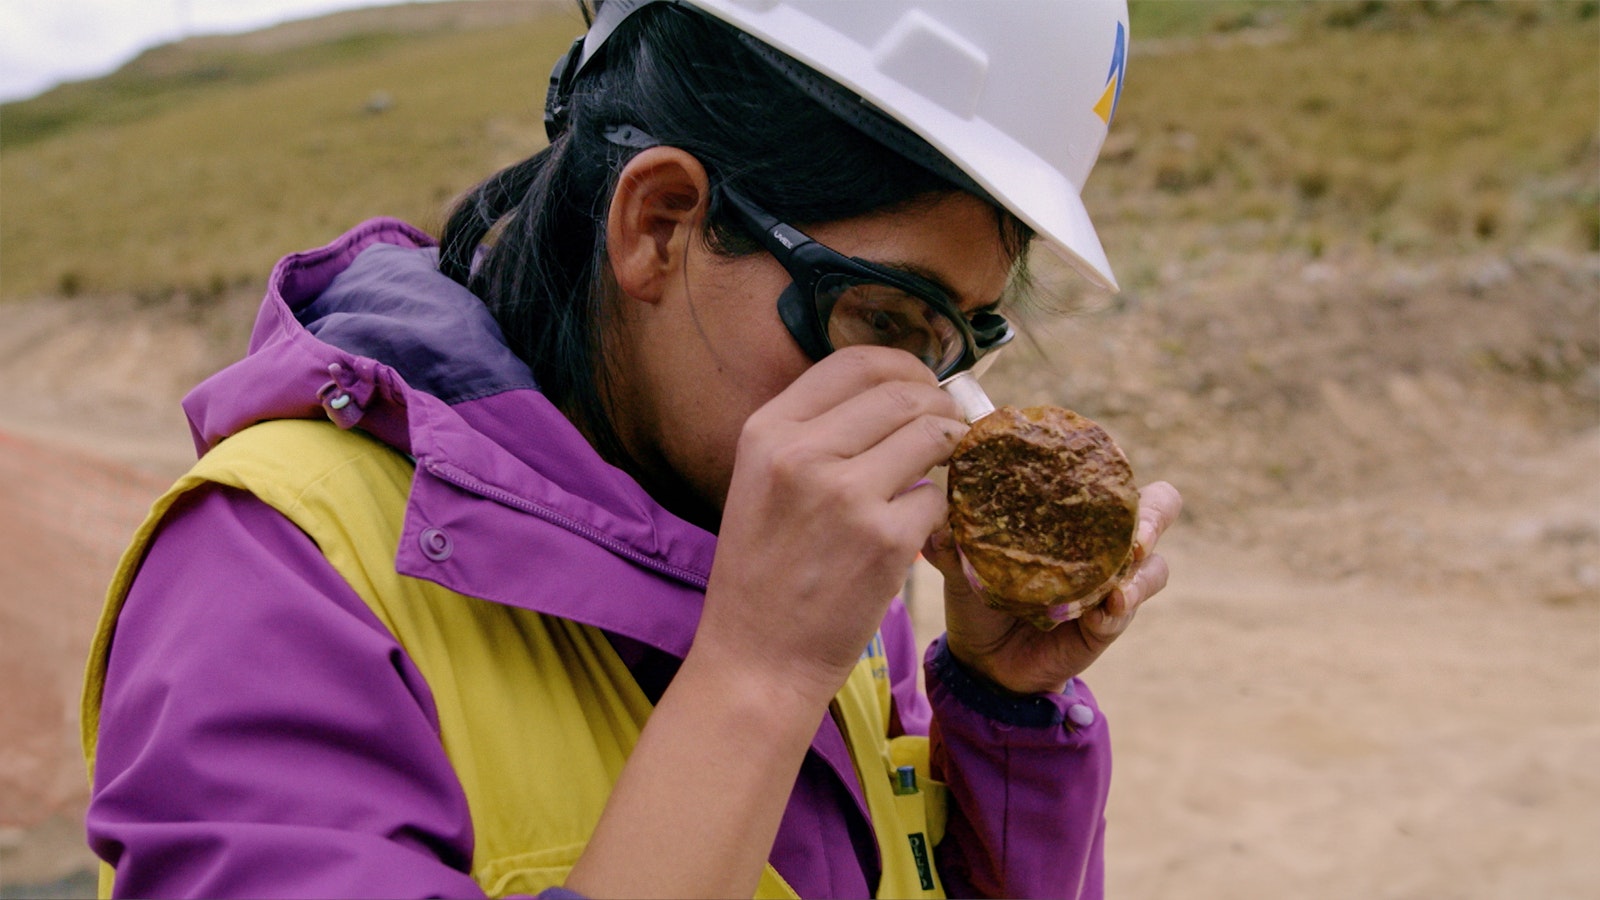 Denisse Quispe inspects a large rock, a brown Earth core, with a magnifying glass in her right hand.